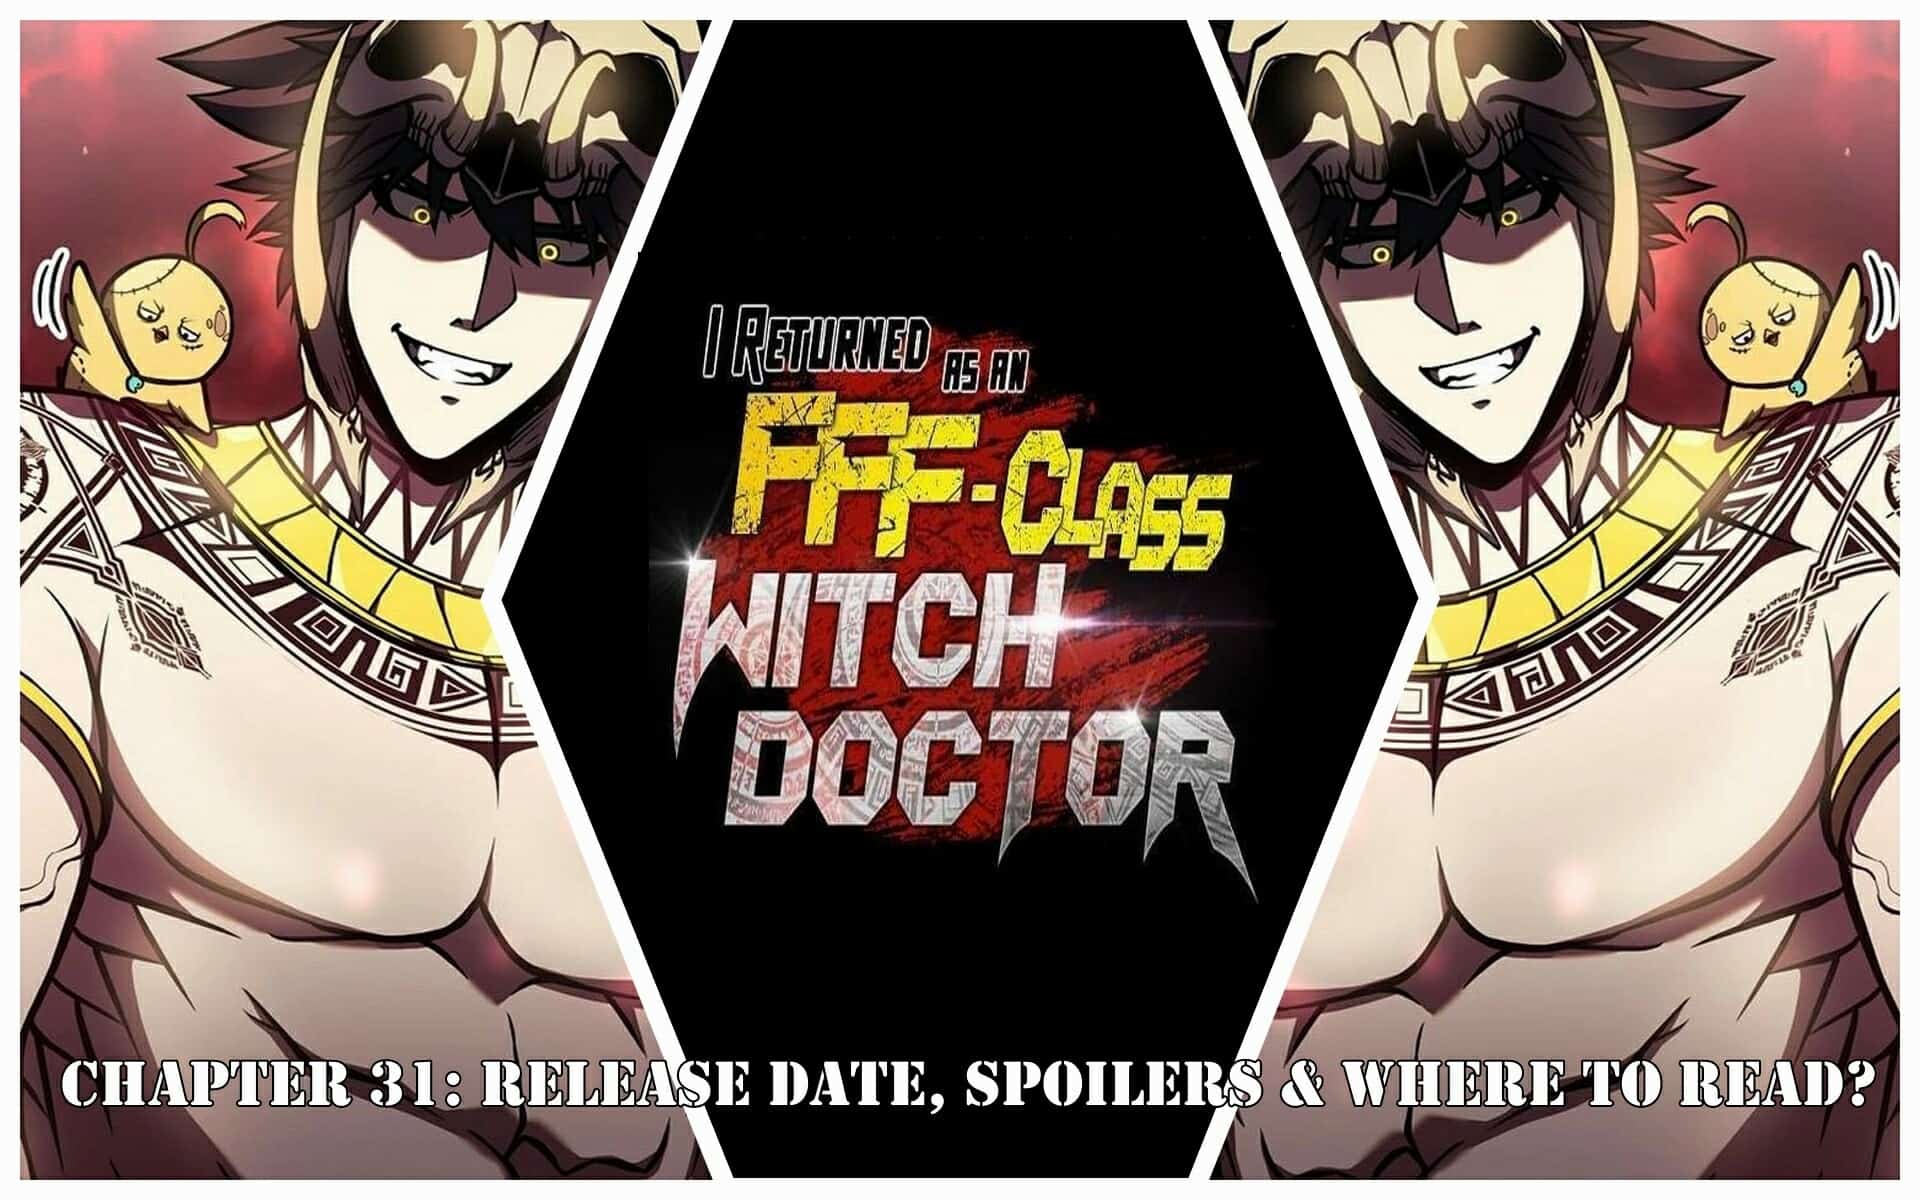 I Returned As An FFF-Class Witch Doctor Chapter 31: Release Date, Spoilers & Where to Read?